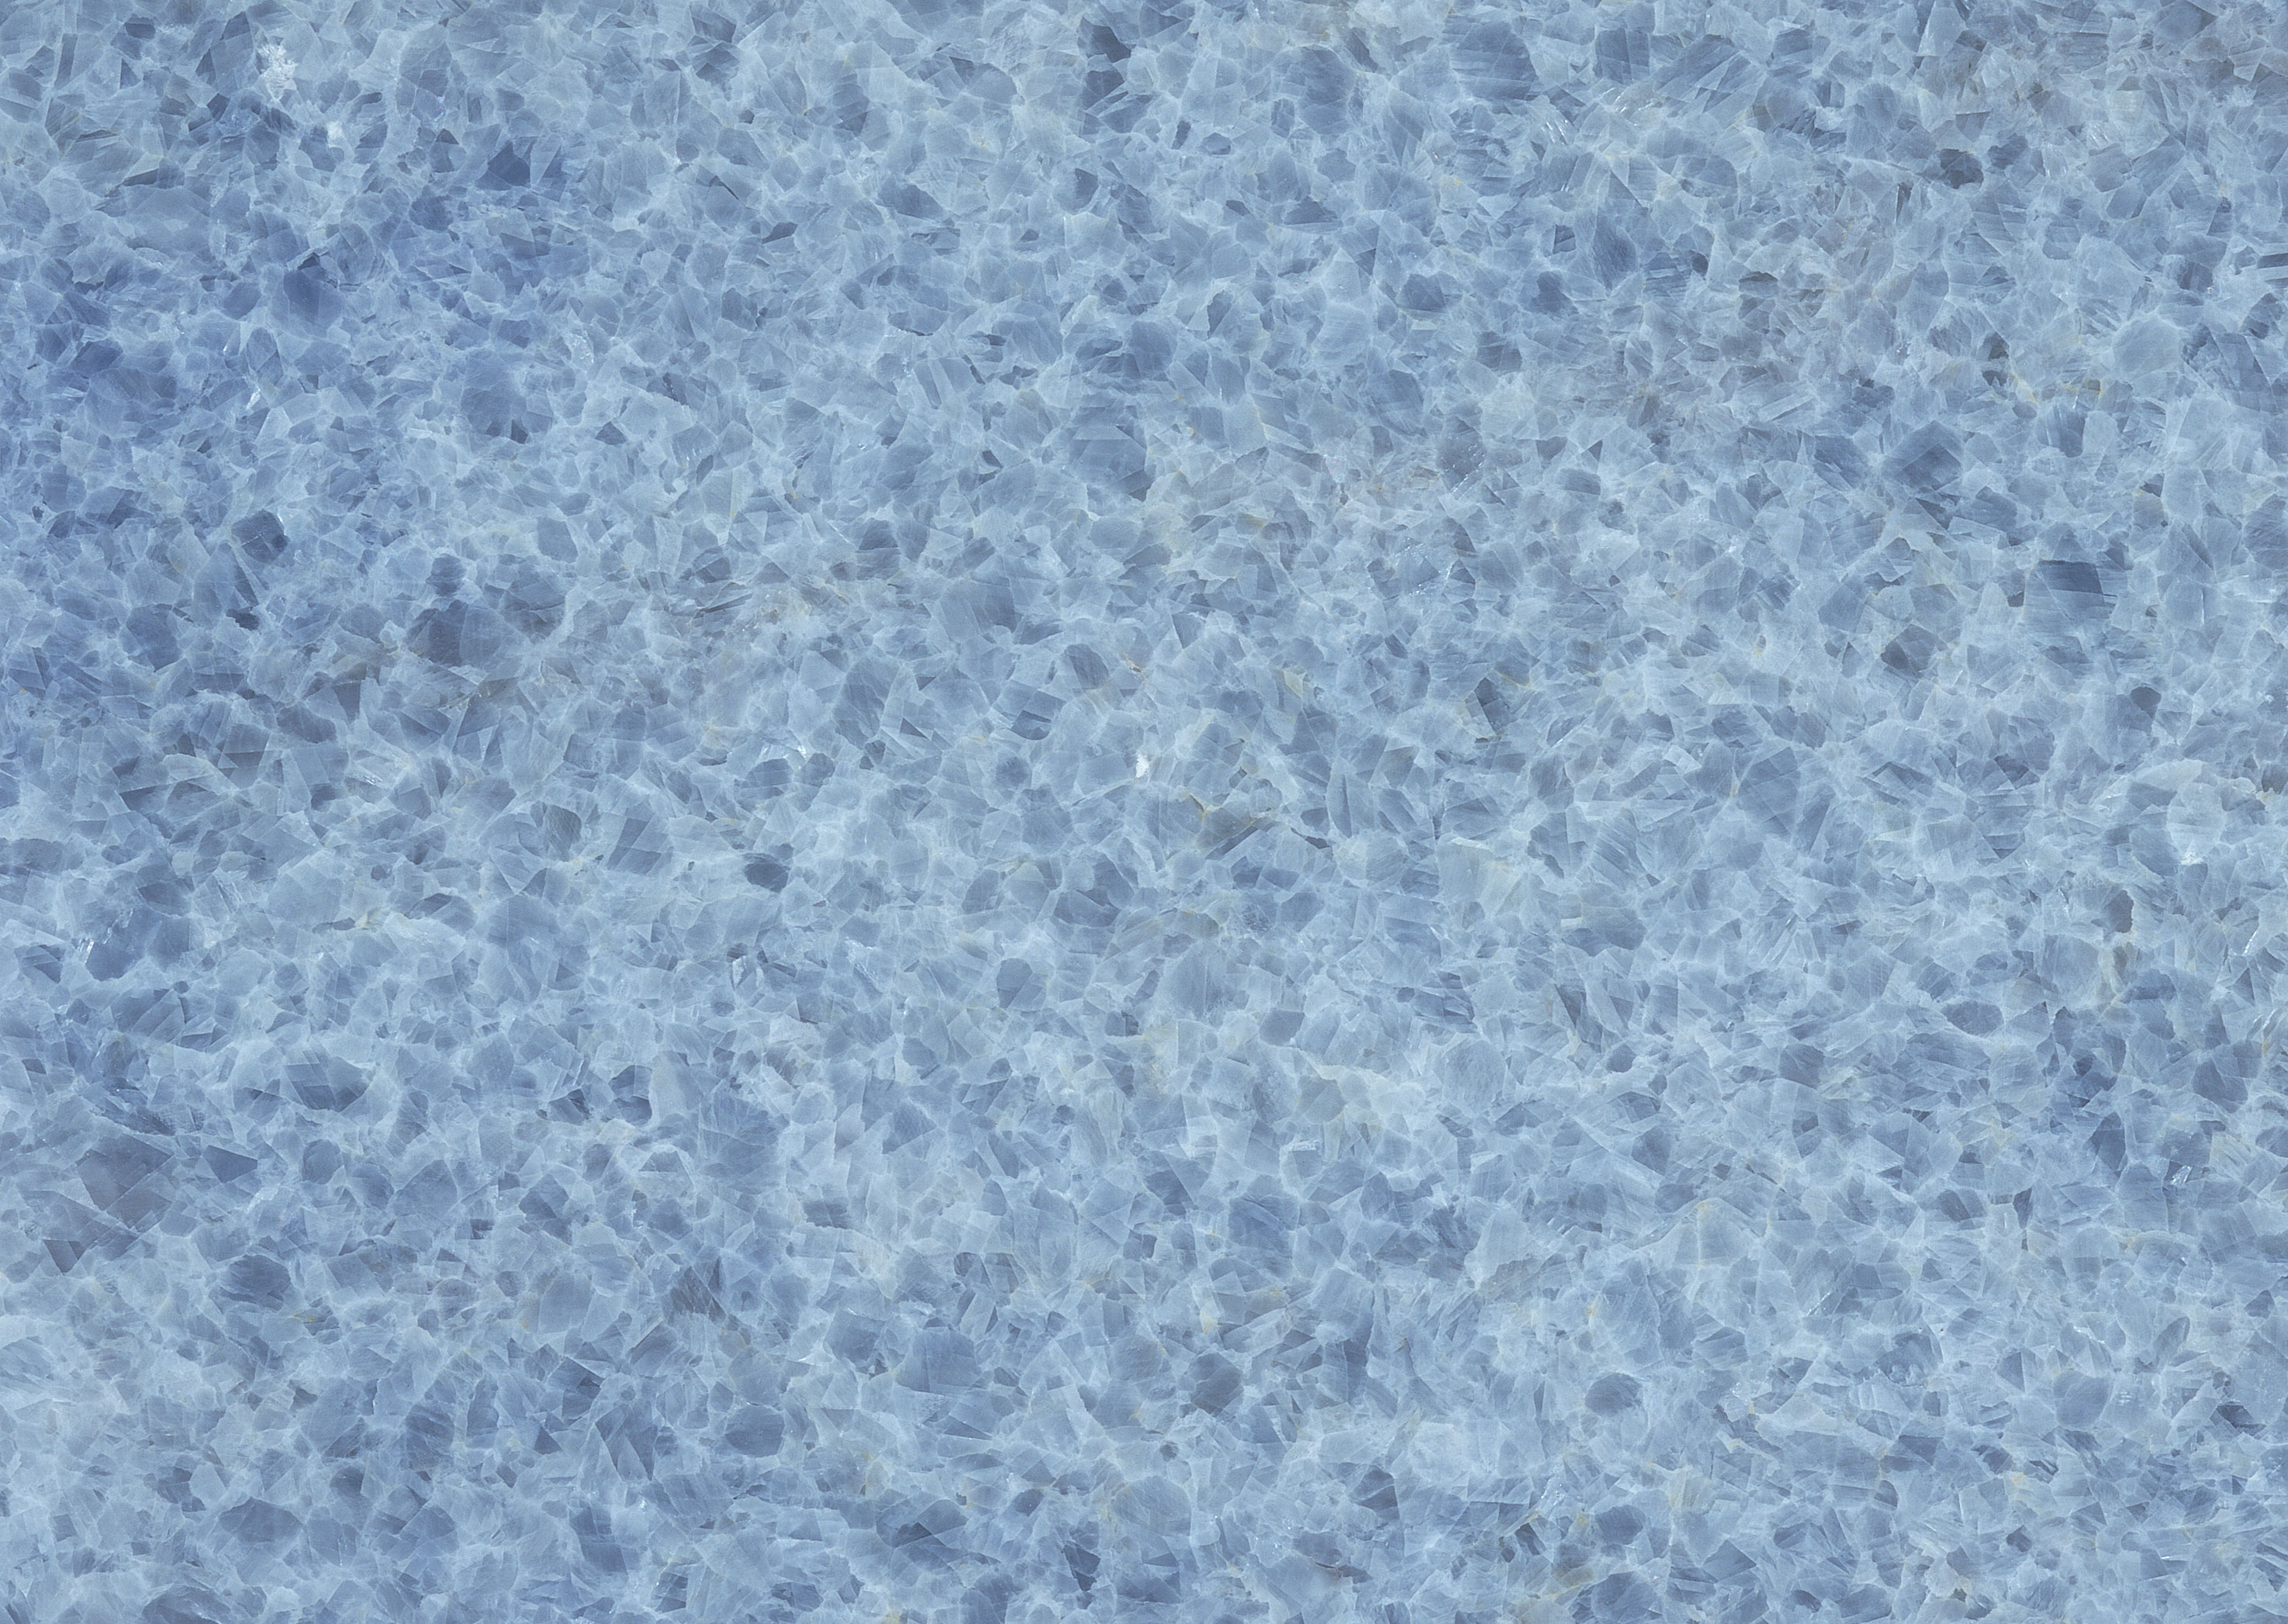 marble texture, background marble image | materials | Pinterest ...